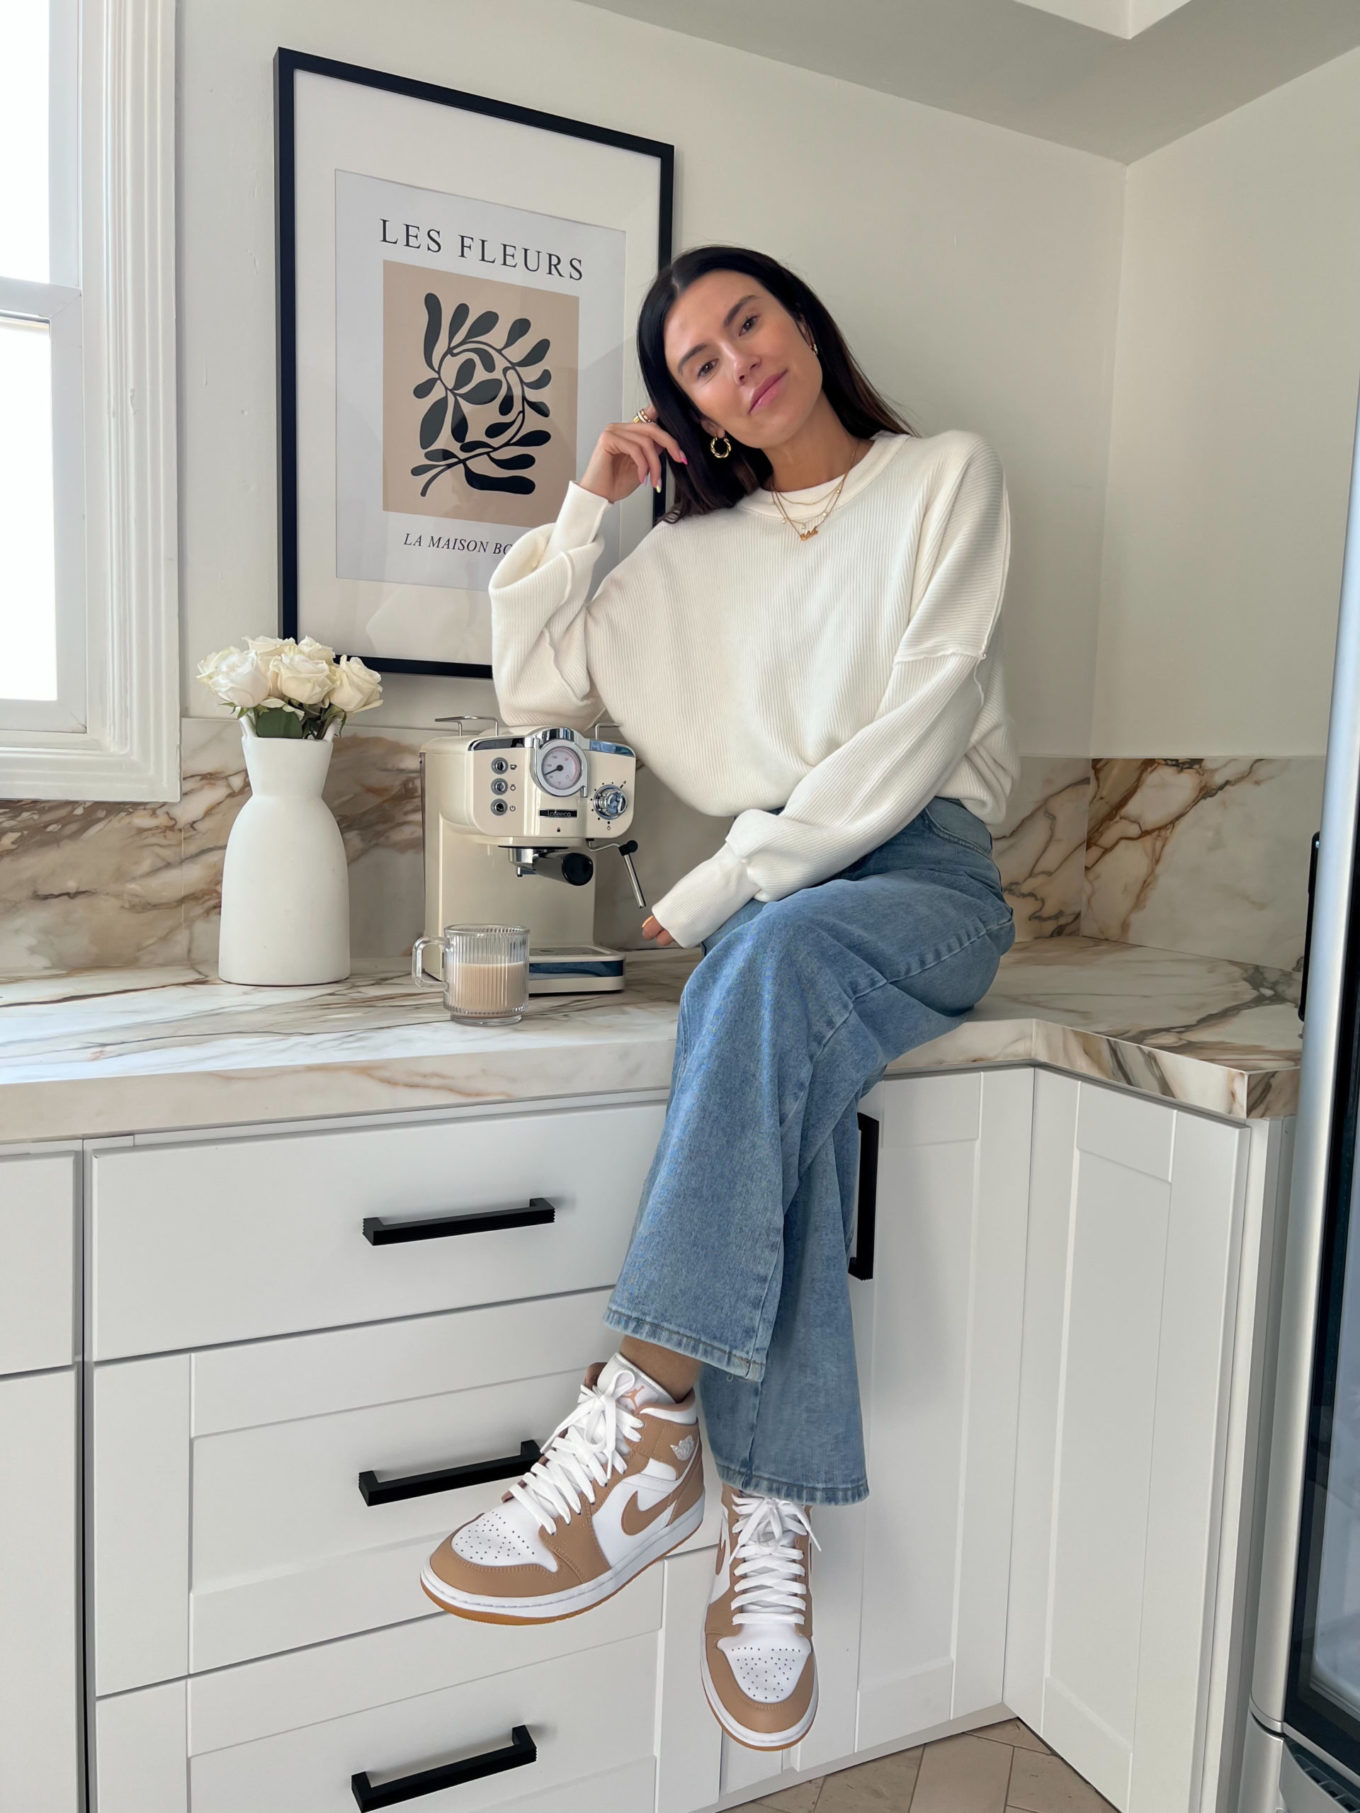 amazon home, espresso machine, print les fleurs, glass coffee mugs, white sweater, denim jeans, brown leather shoes, gold jewelry